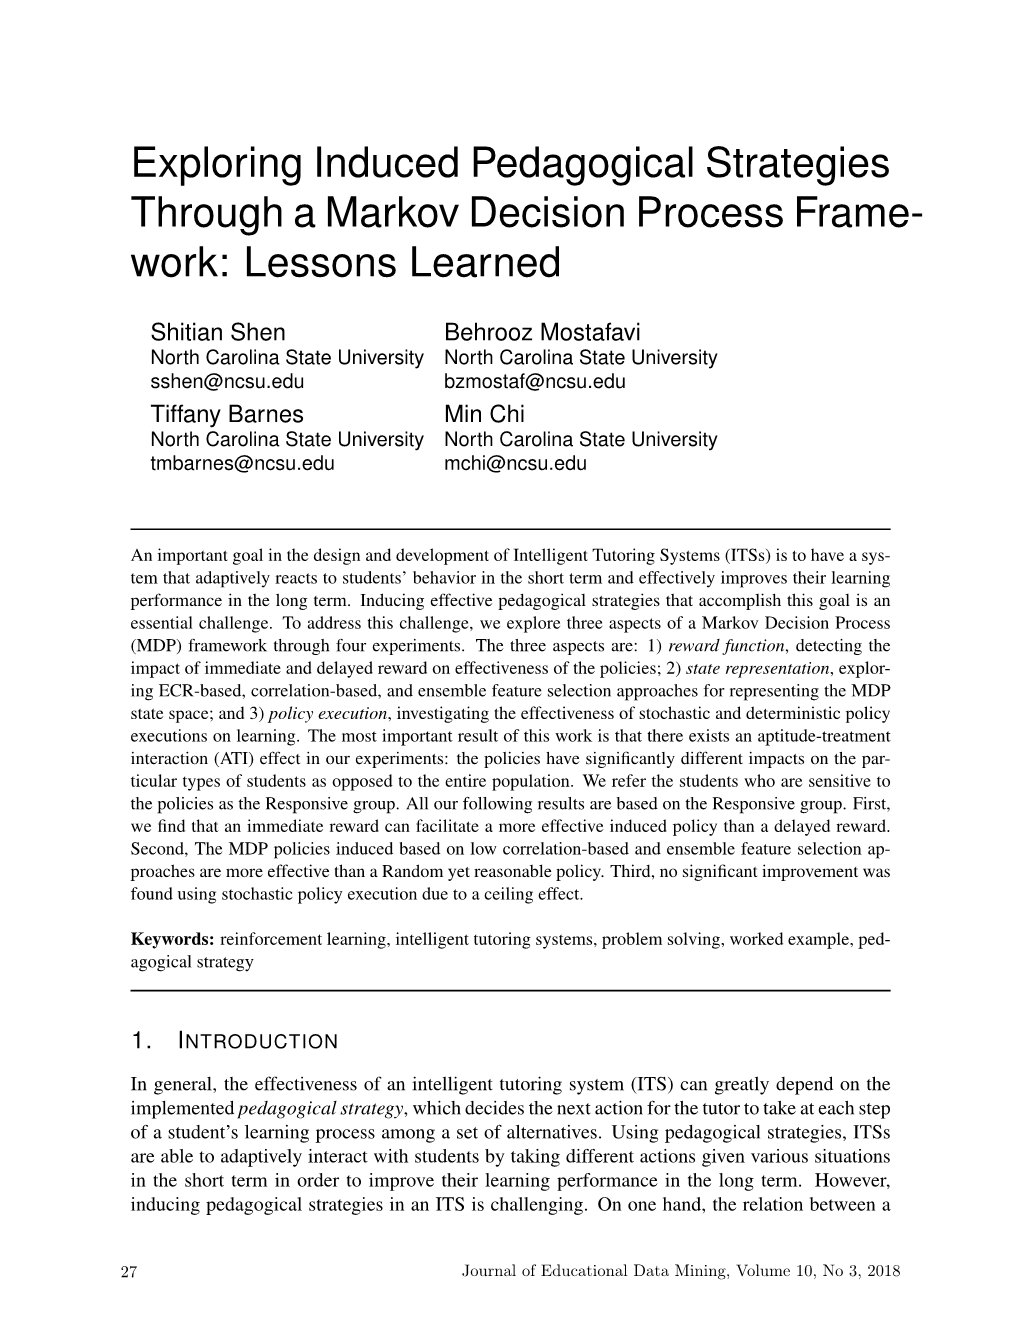 Exploring Induced Pedagogical Strategies Through a Markov Decision Process Frame- Work: Lessons Learned